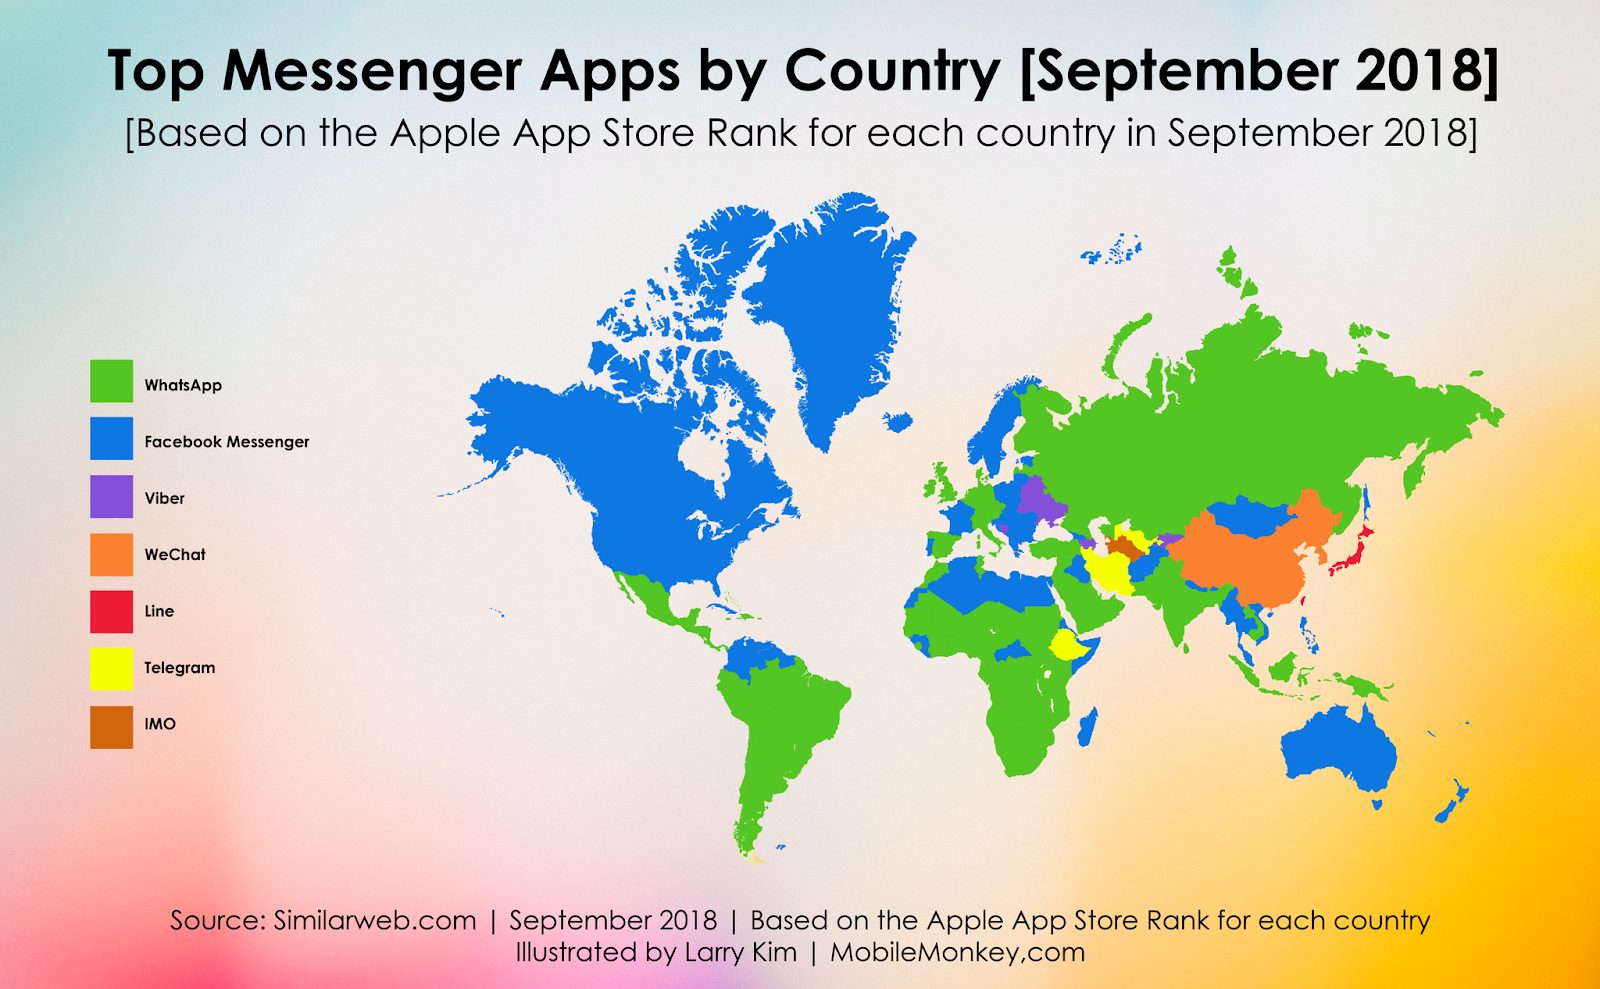 Top Messenger Apps by Country [September 2018]